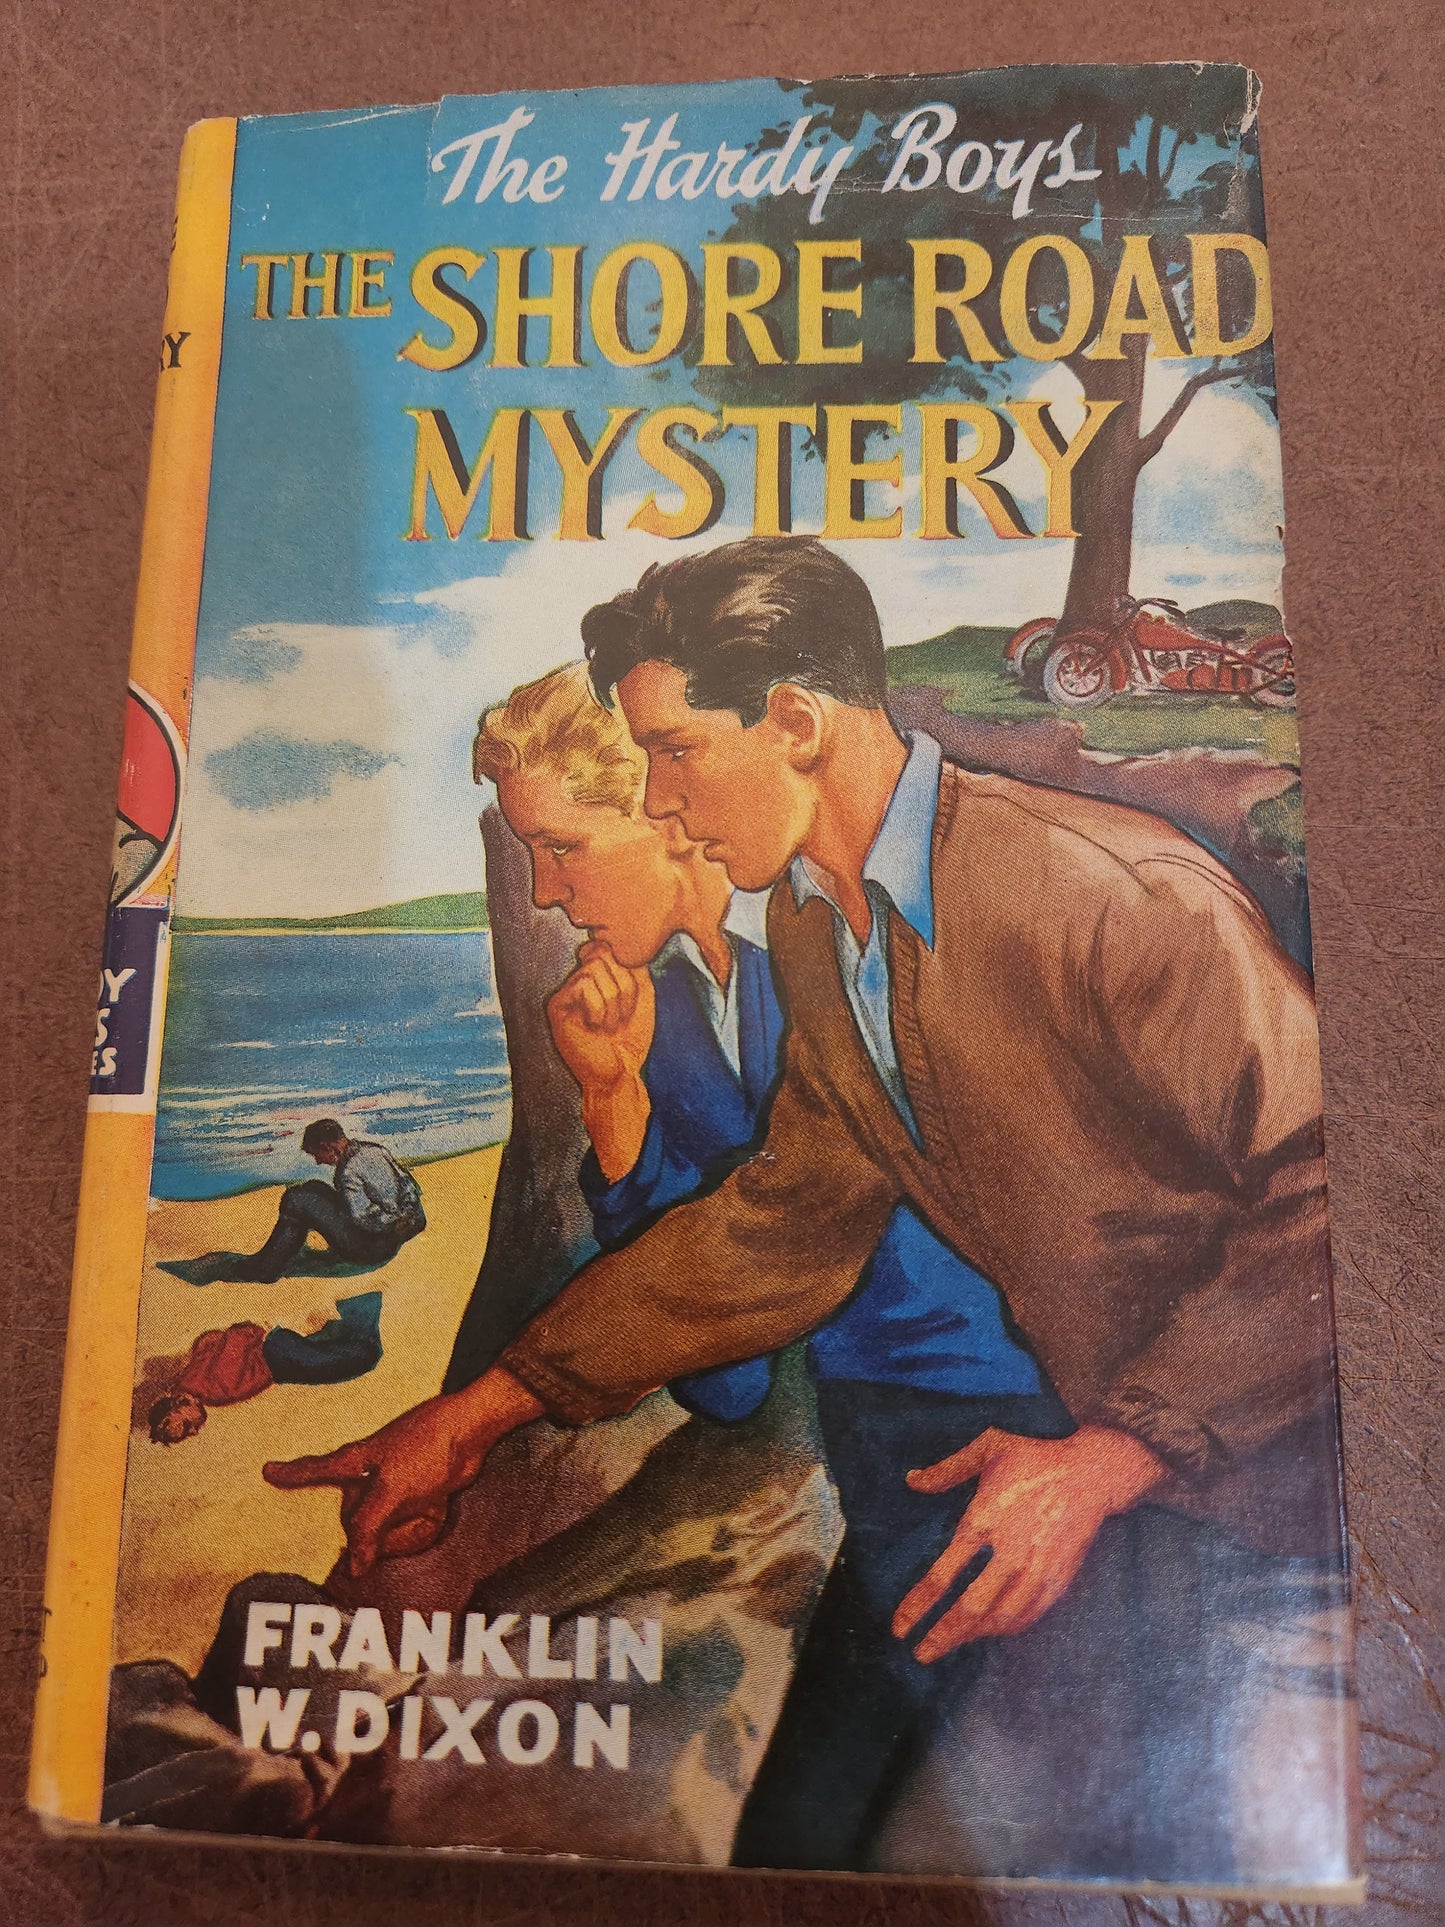 Hardy Boys The Shore Road Mystery, Pub 28/printed 58, Yellow spine, Dixon